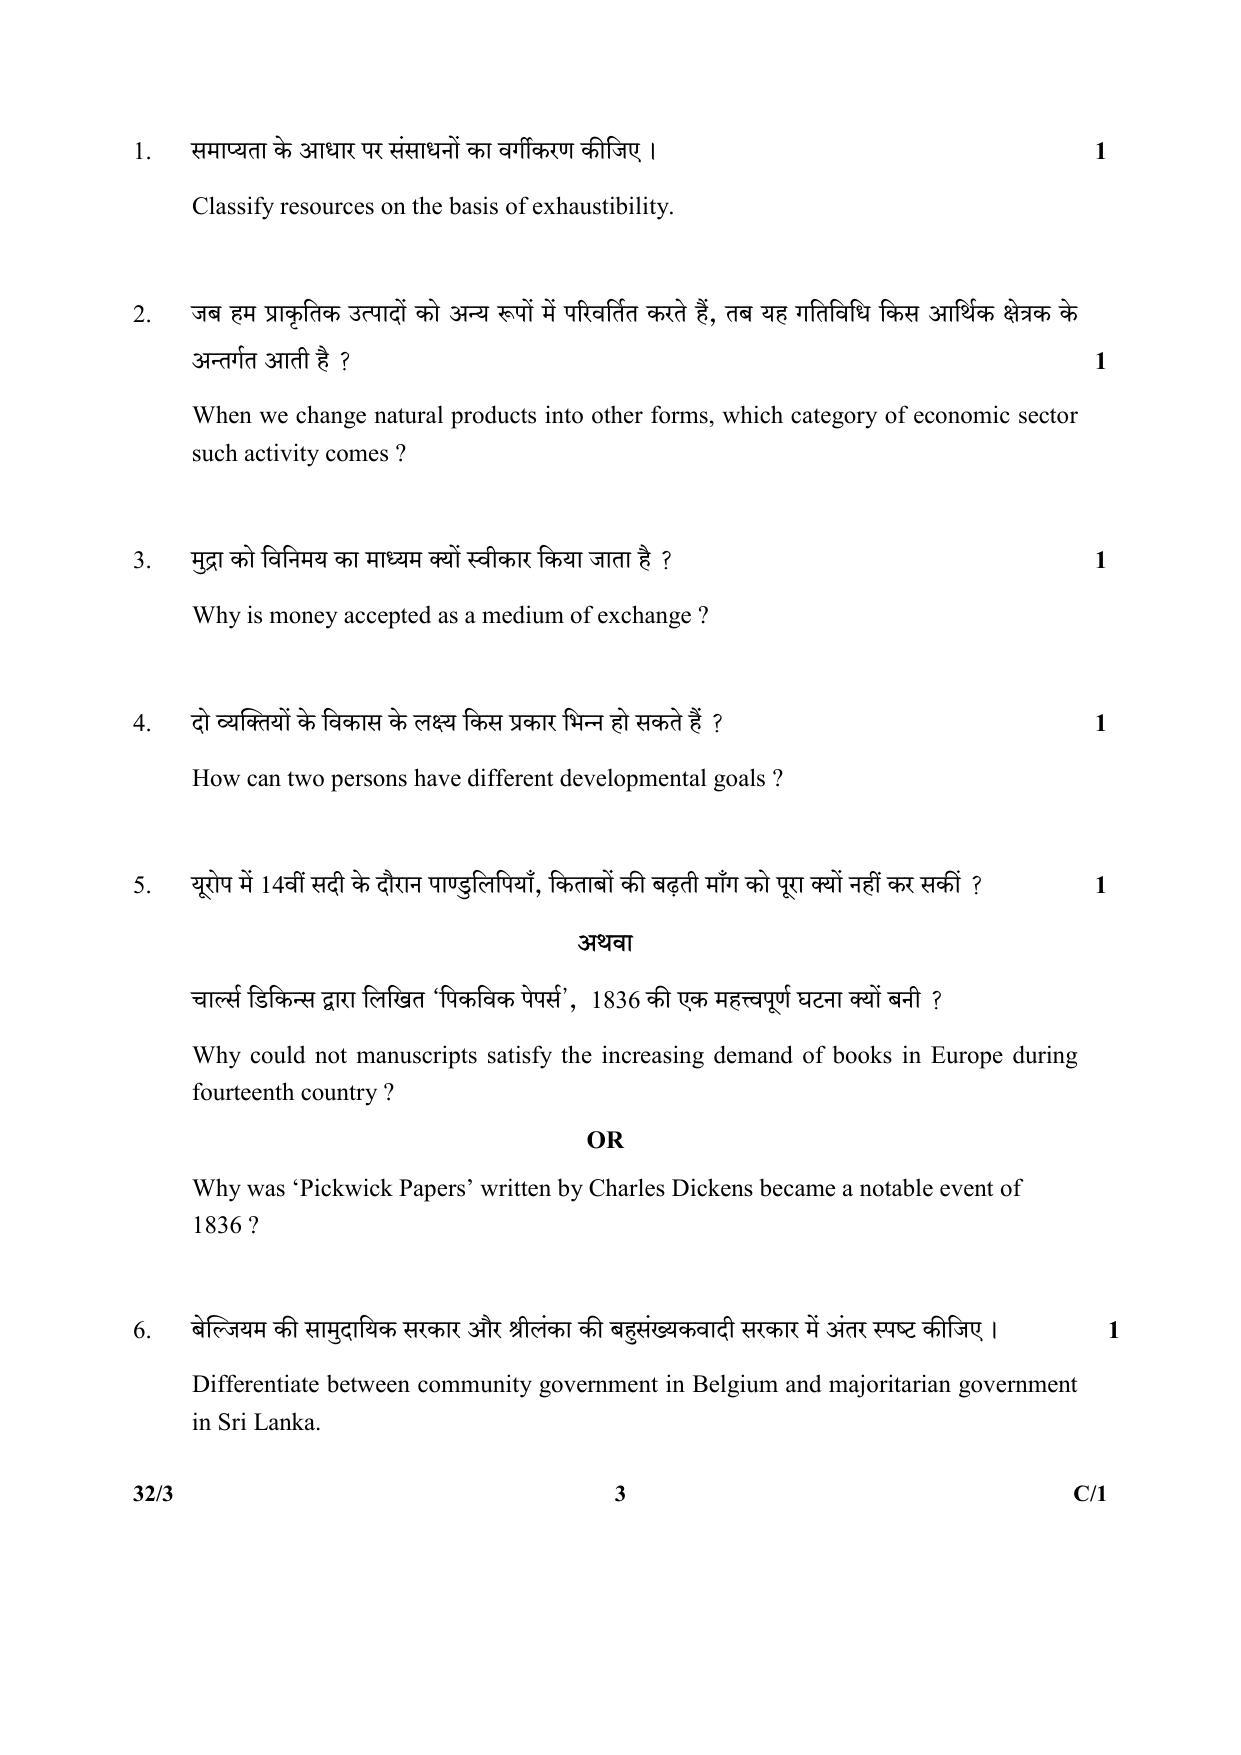 CBSE Class 10 32-3_Social Science 2018 Compartment Question Paper - Page 3